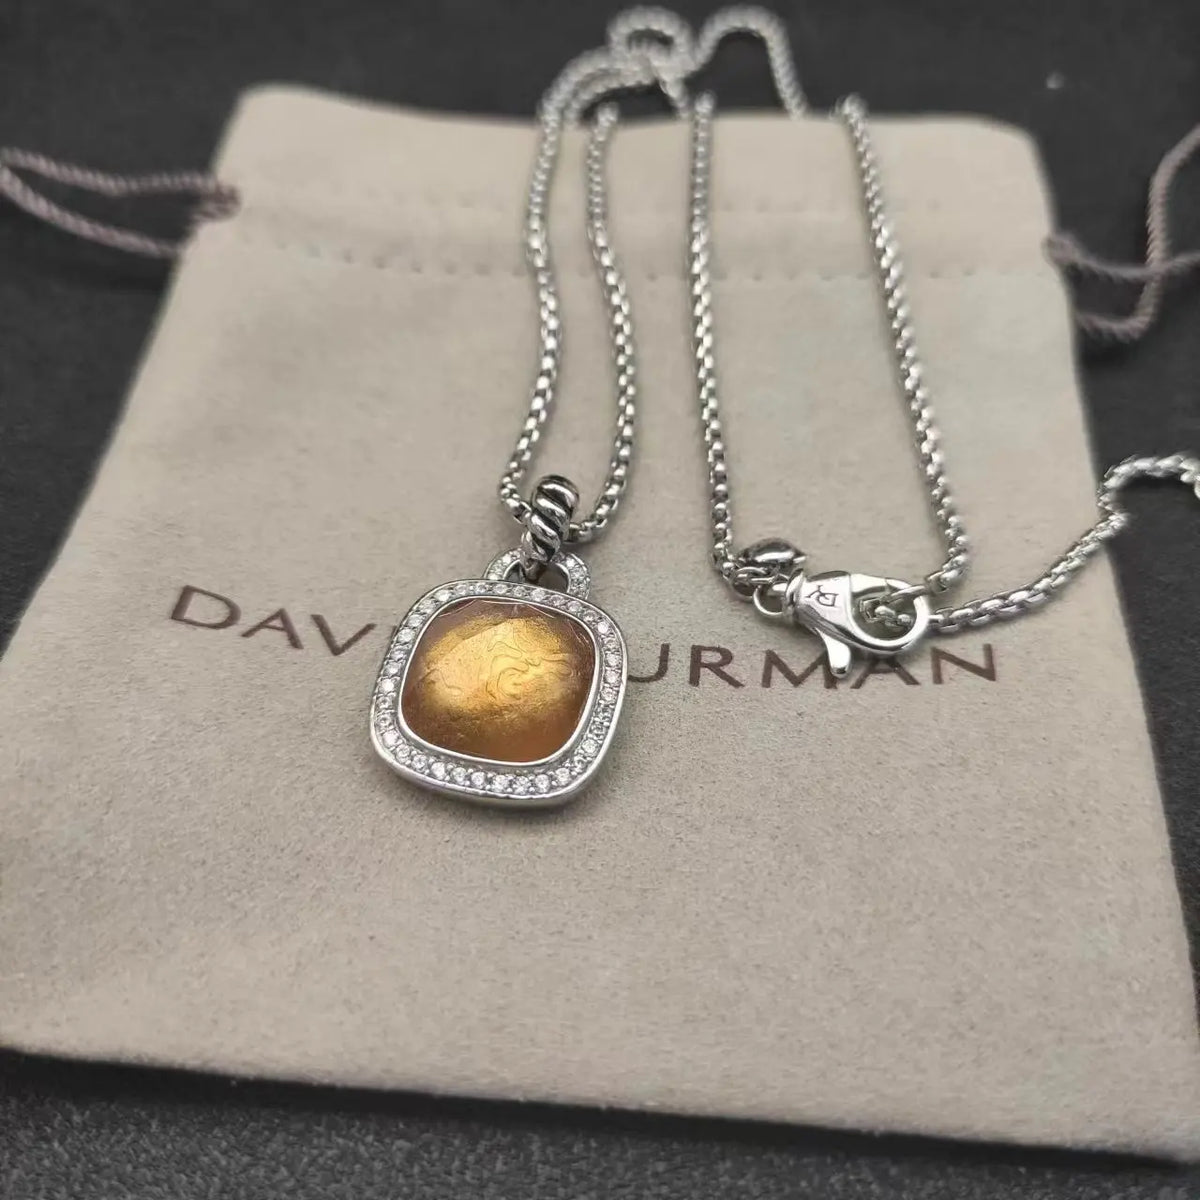 YS New David High Quality Women's 14MM Square Gemstone Necklace  Gift Free Shipping